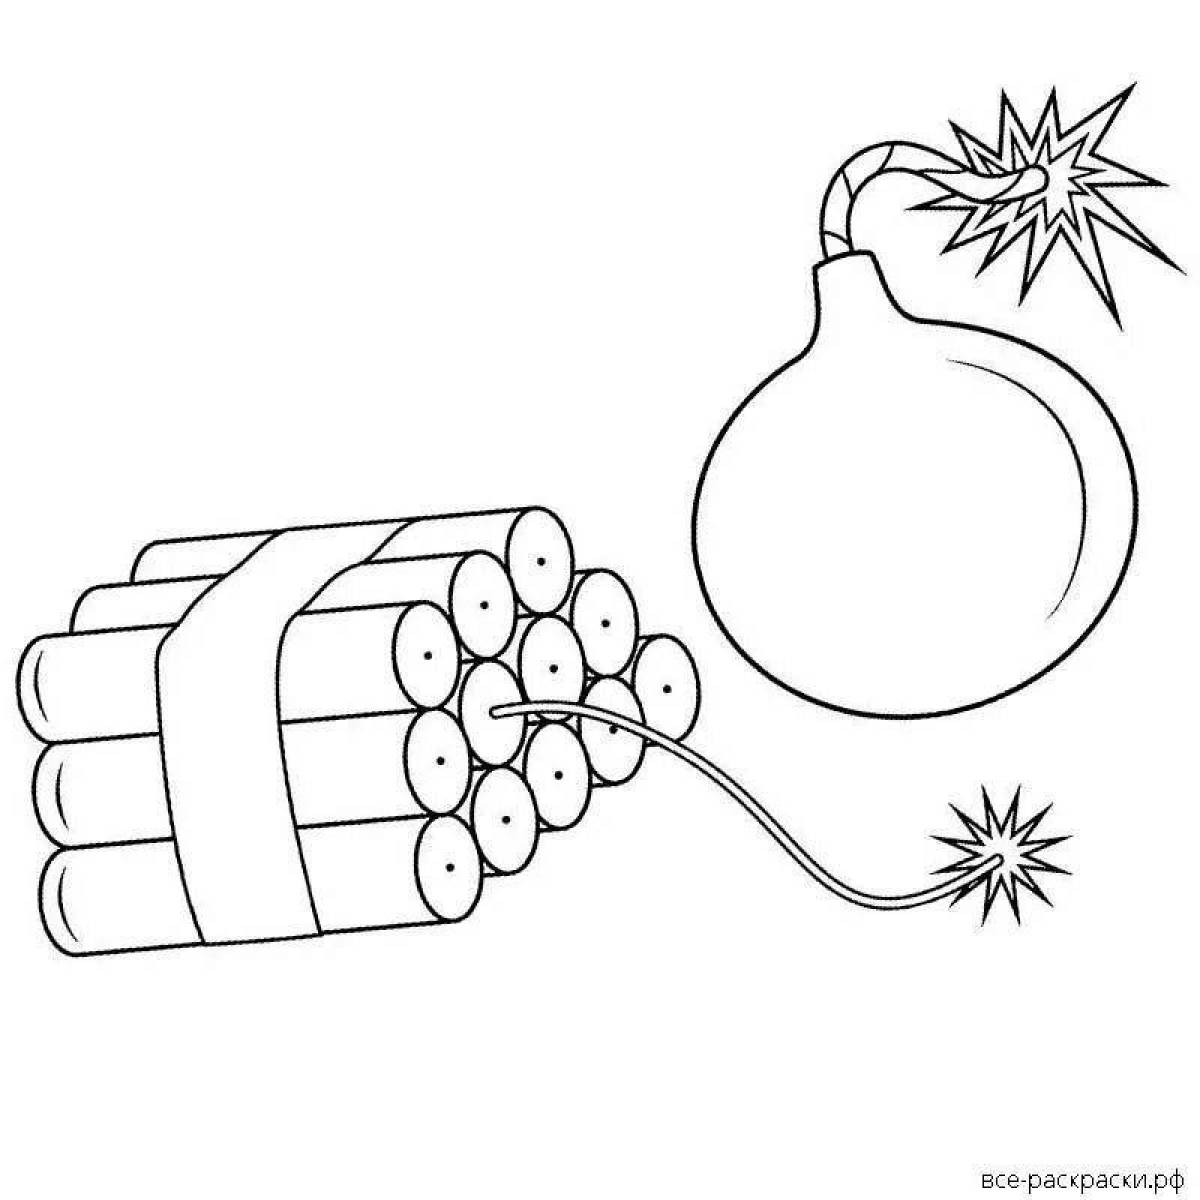 Bomb standoff 2 fun coloring page